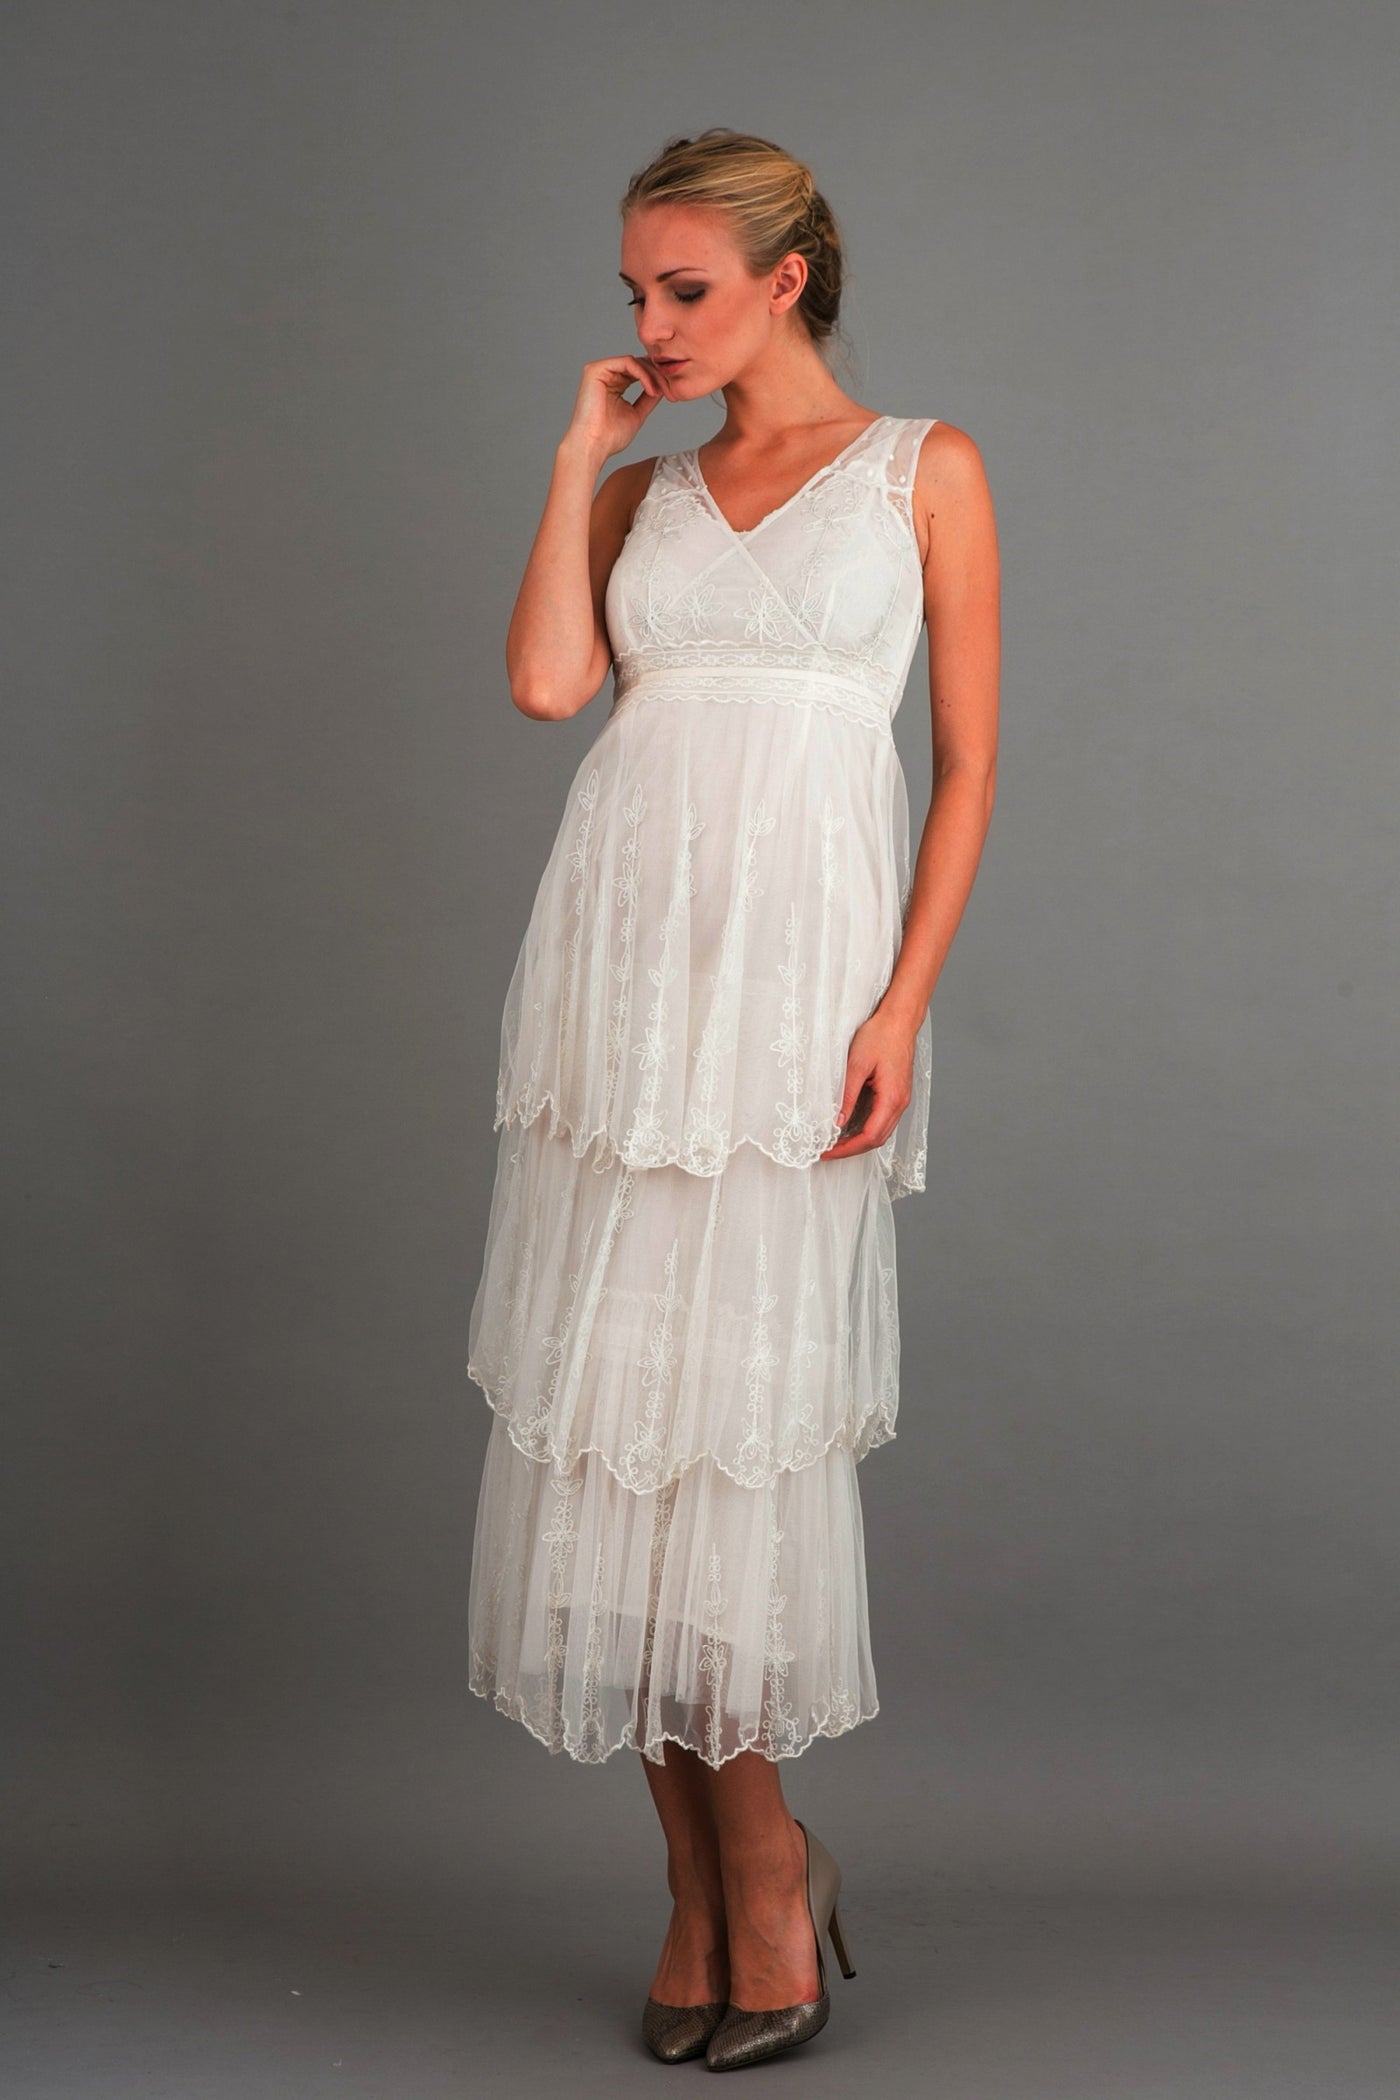 Vintage Inspired Empire Waist Party Dress in Ivory - SOLD OUT